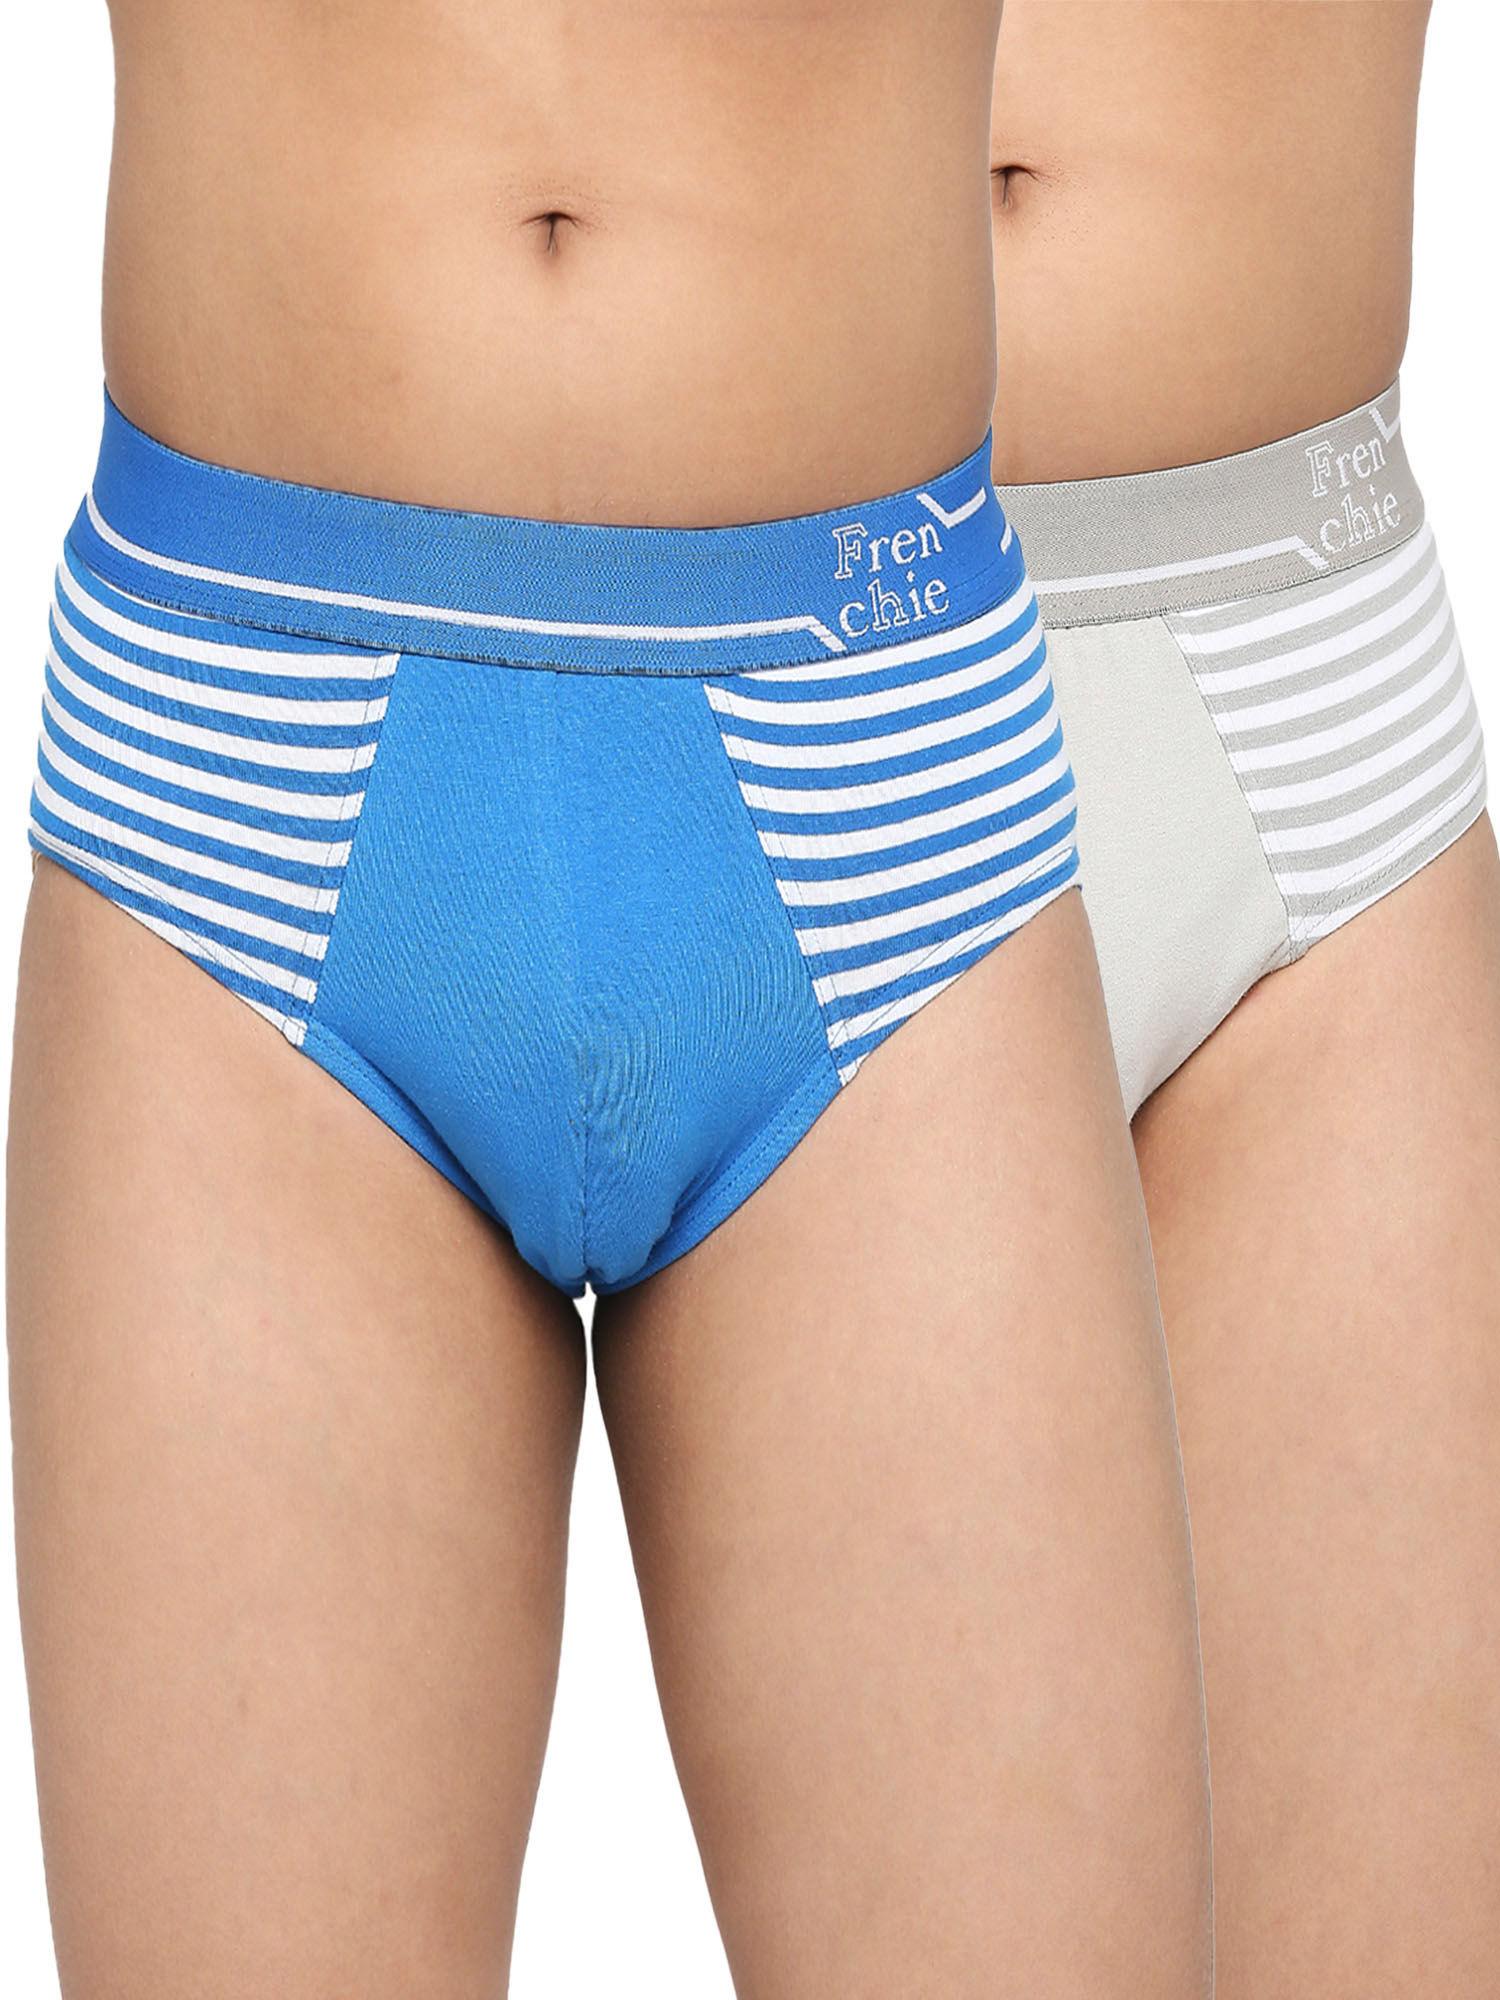 teenagers-cotton-brief-blue-and-light-grey-(pack-of-2)